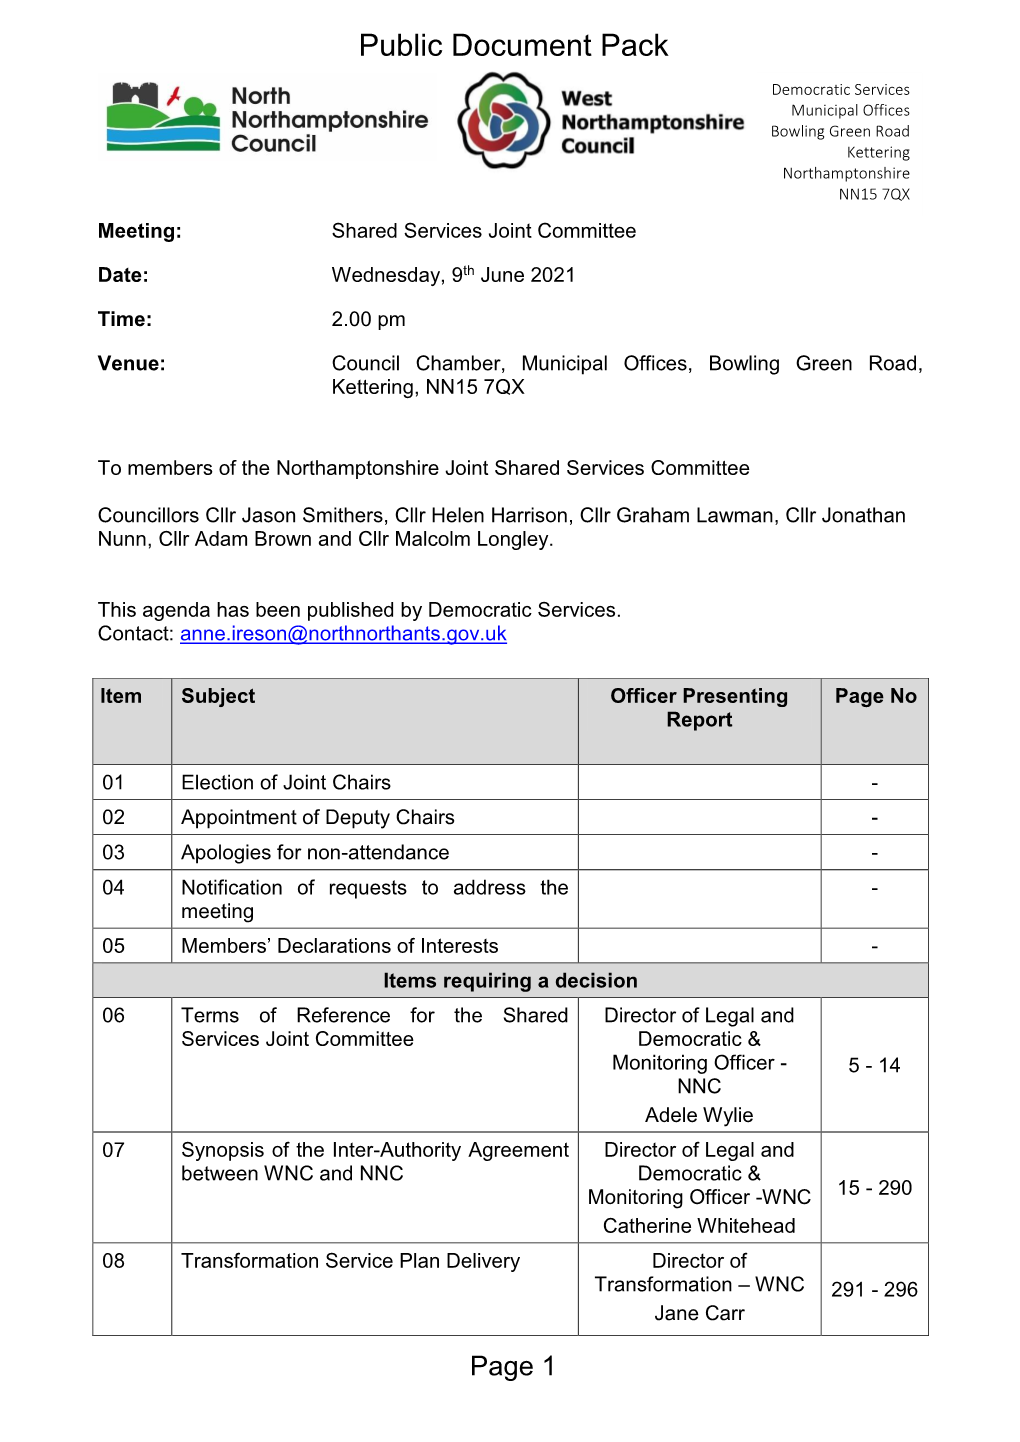 (Public Pack)Agenda Document for Joint Shared Services Committee, 09/06/2021 14:00